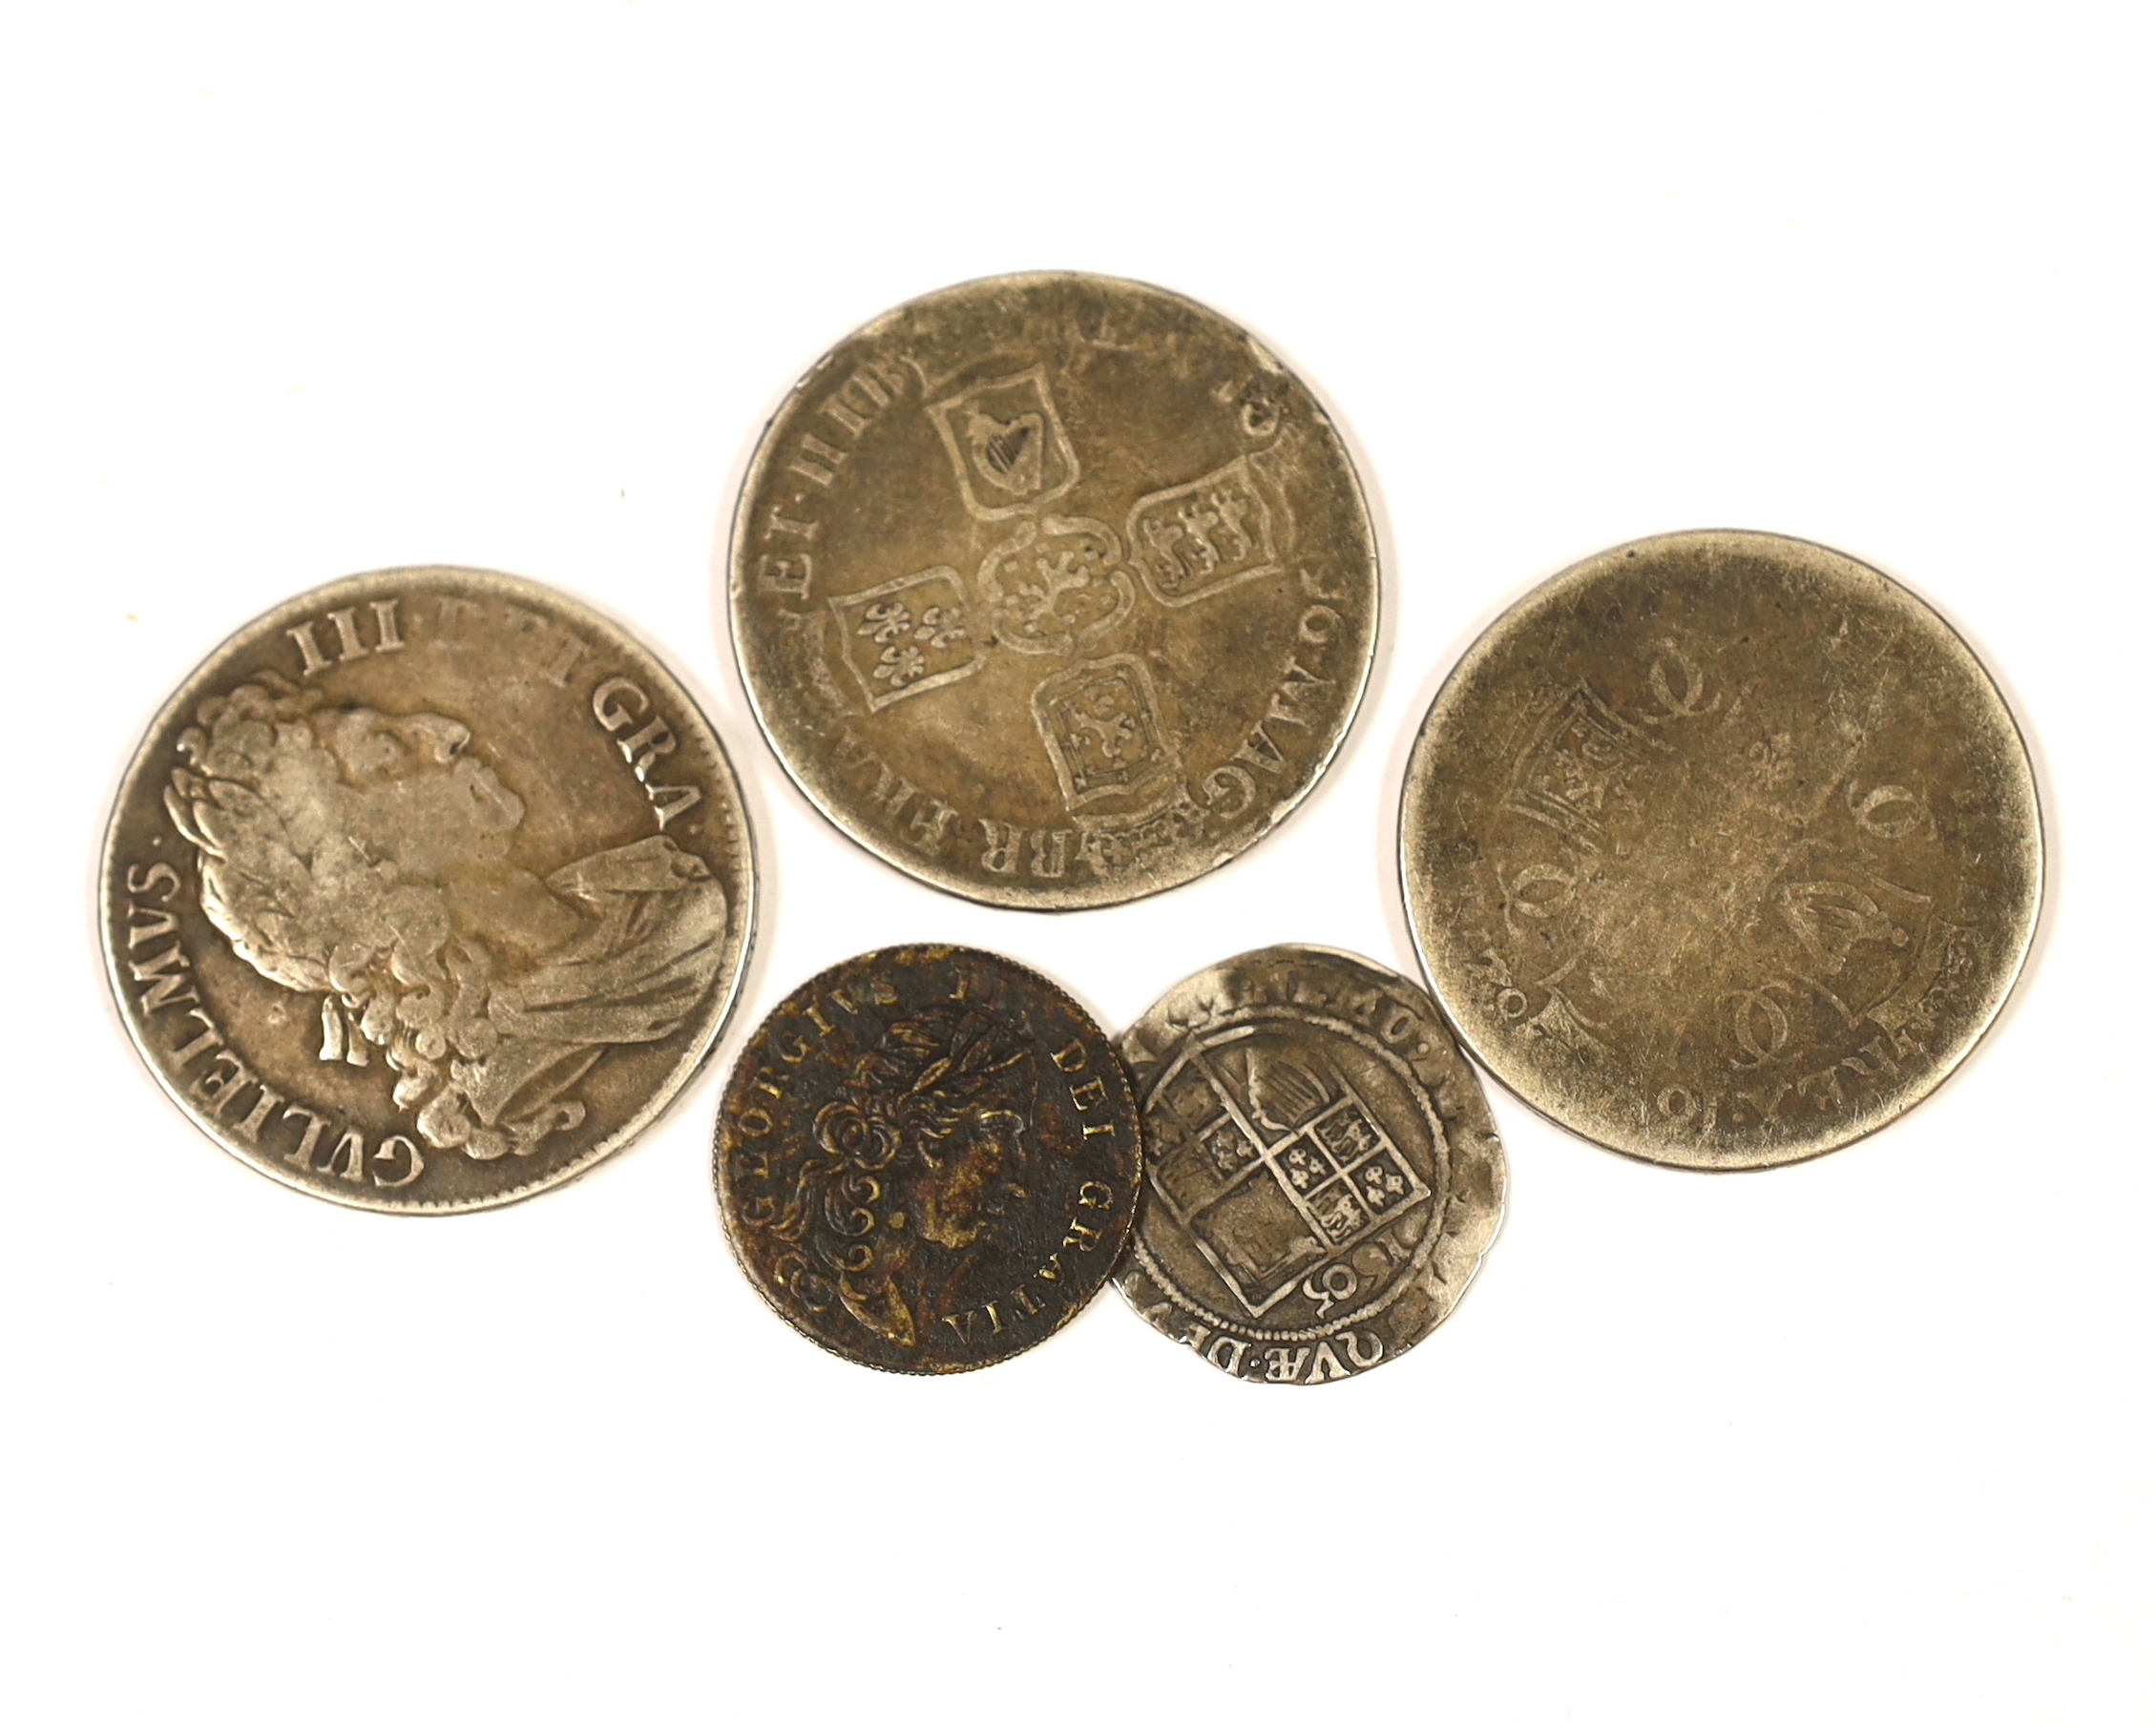 British silver coins - a Charles II crown 1682, two William III silver crowns, 1696, a James VI sixpence, 1605, together with a George III token